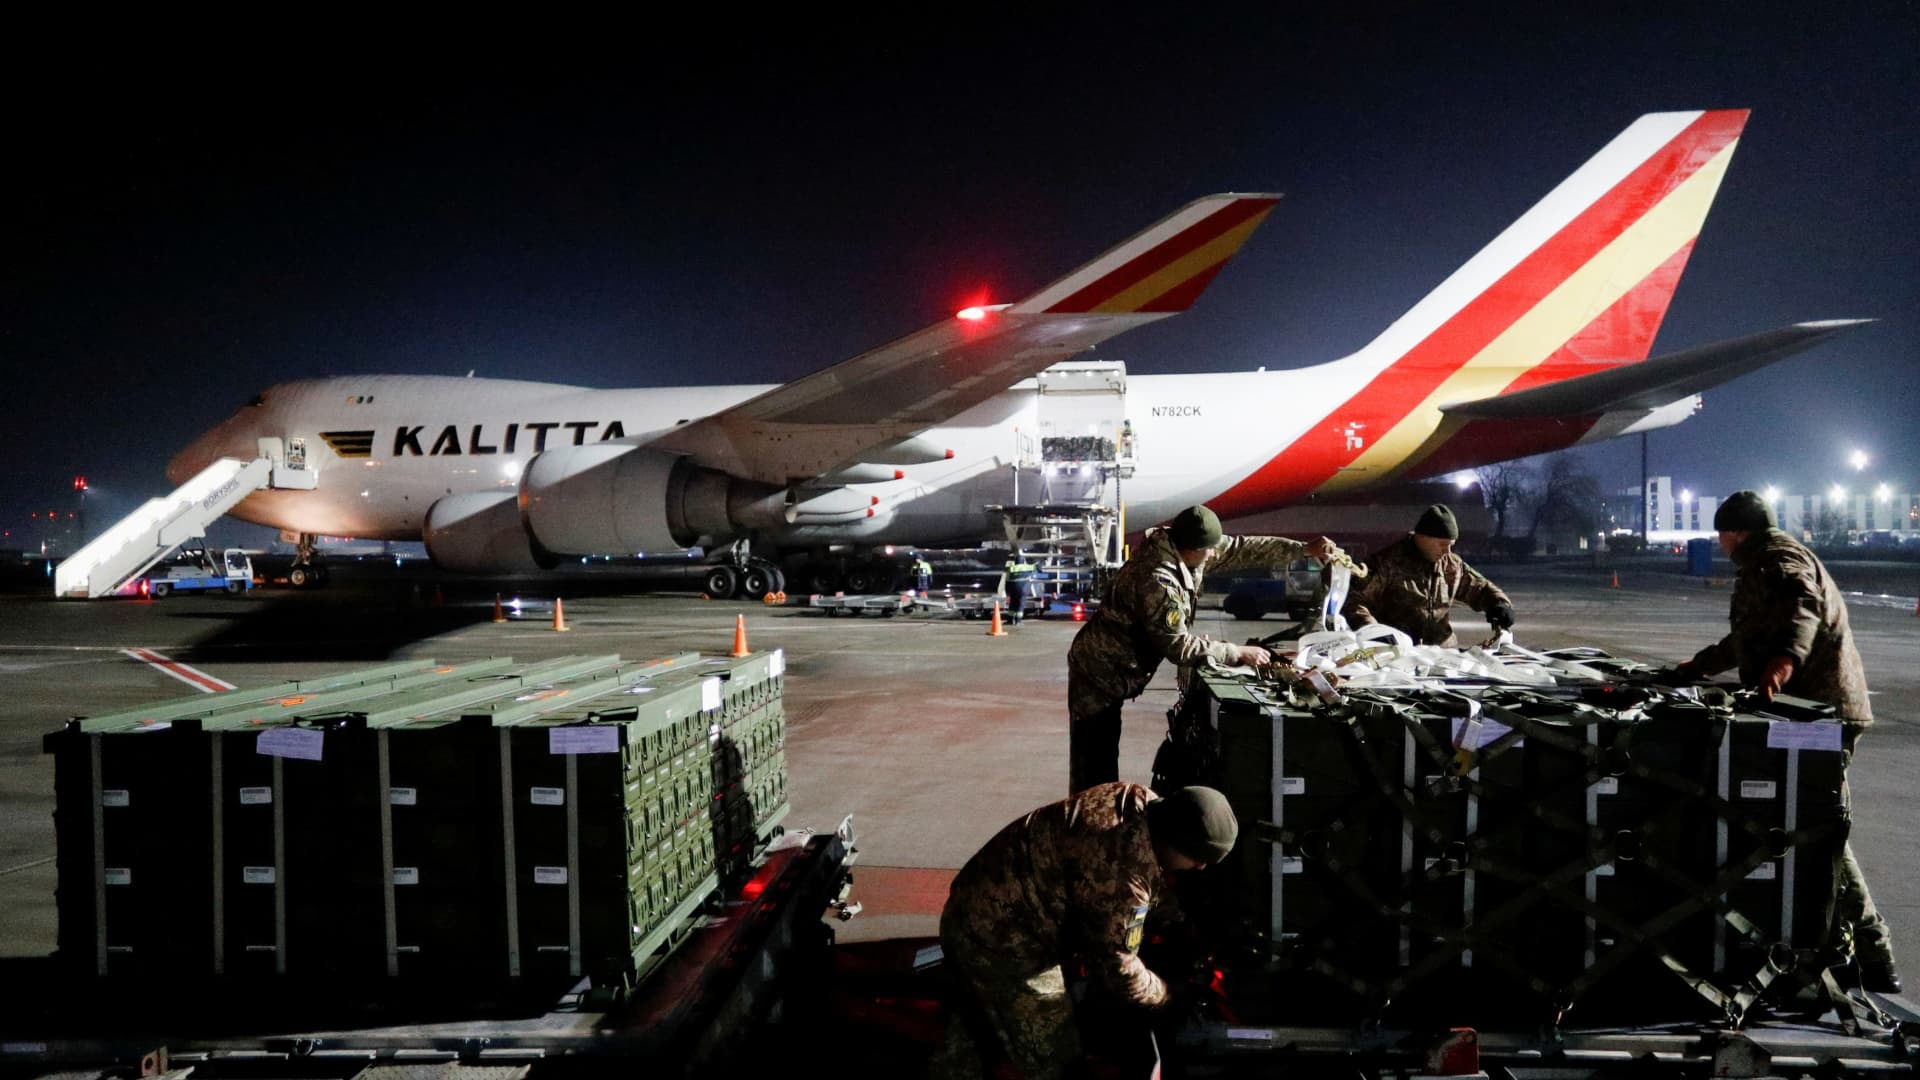 Ukrainian service members take part in the unloading of U.S. military aid, delivered by plane, as part of the security support package for Ukraine, at the Boryspil International Airport outside Kyiv, Ukraine February 10, 2022.